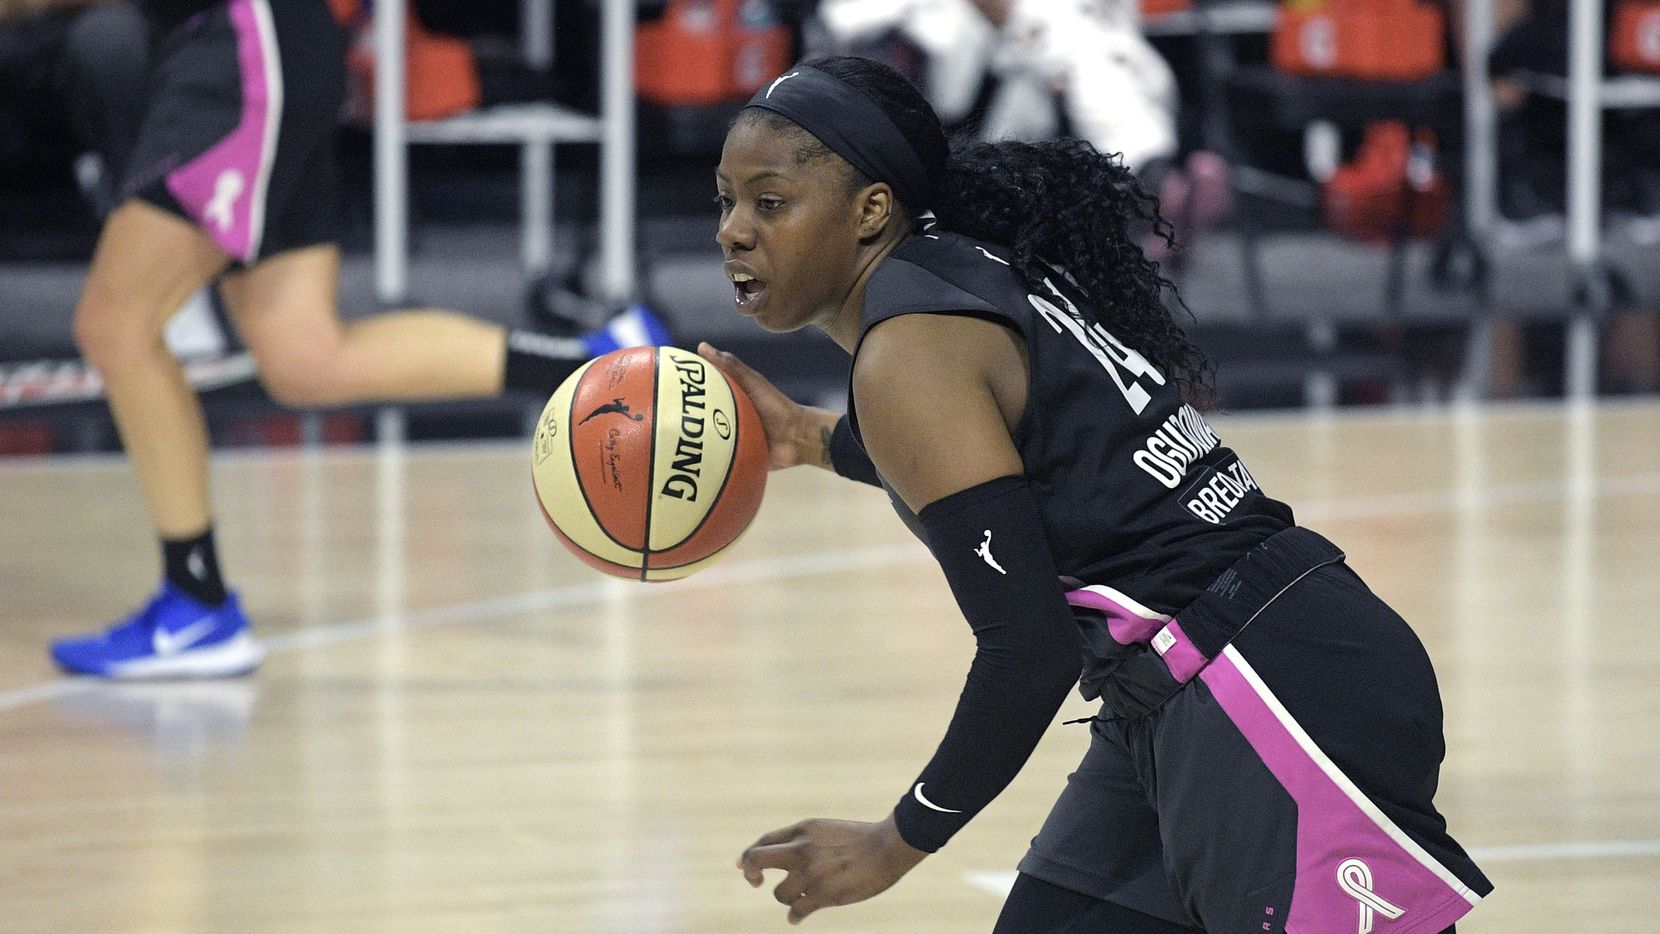 Dallas Wings guard Arike Ogunbowale (24) pushes the ball up the court during the first half of a WNBA basketball game against the Las Vegas Aces, Tuesday, Aug. 25, 2020, in Bradenton, Fla.